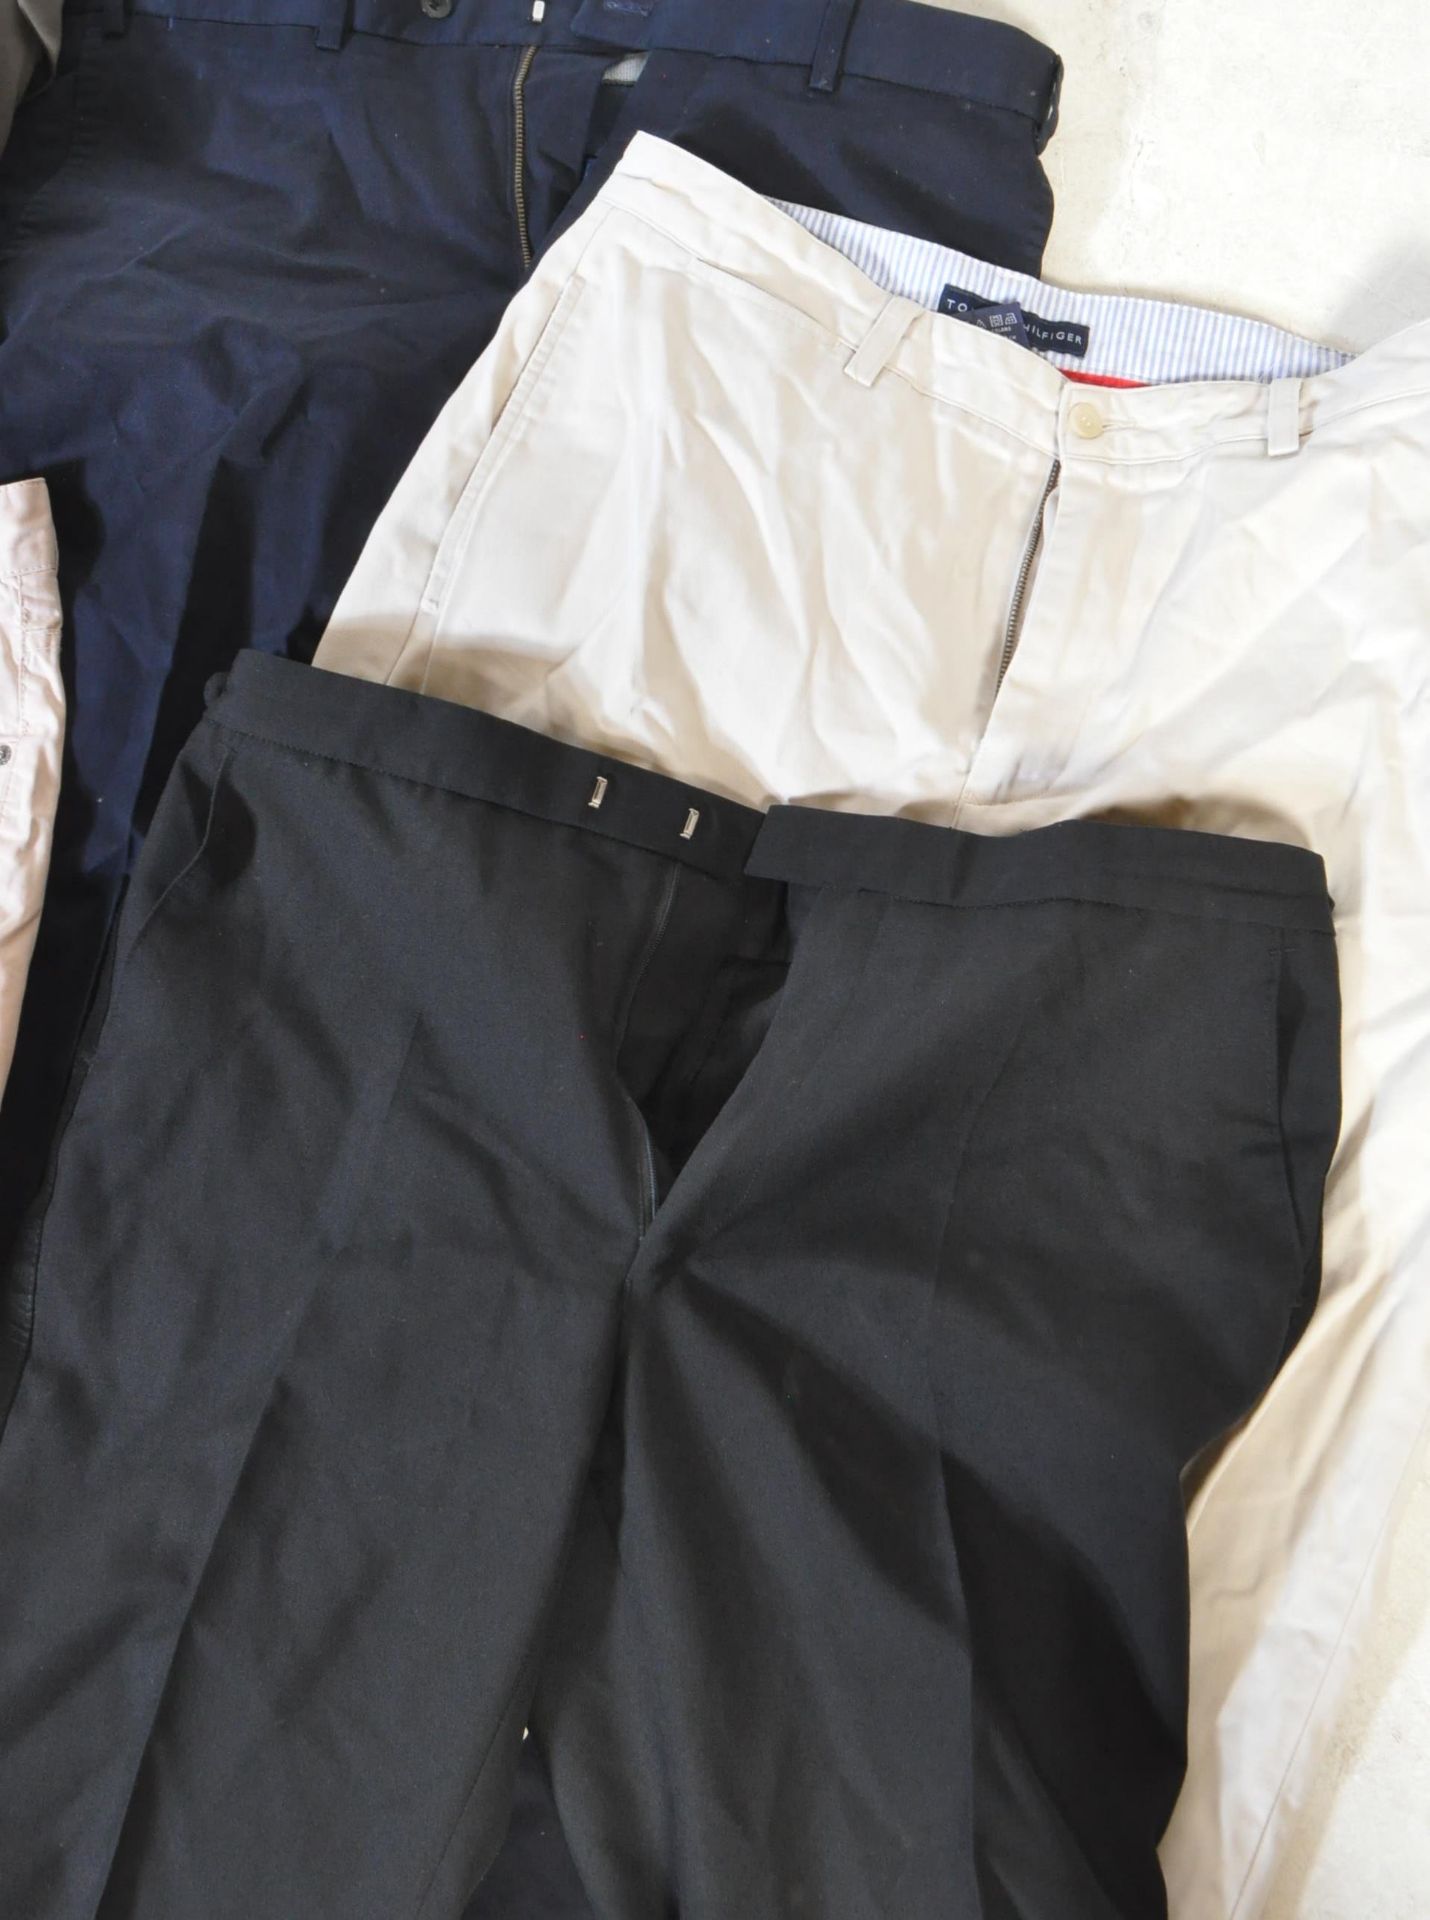 COLLECTION OF VINTAGE DESIGNER GENTS TROUSERS - Image 2 of 7